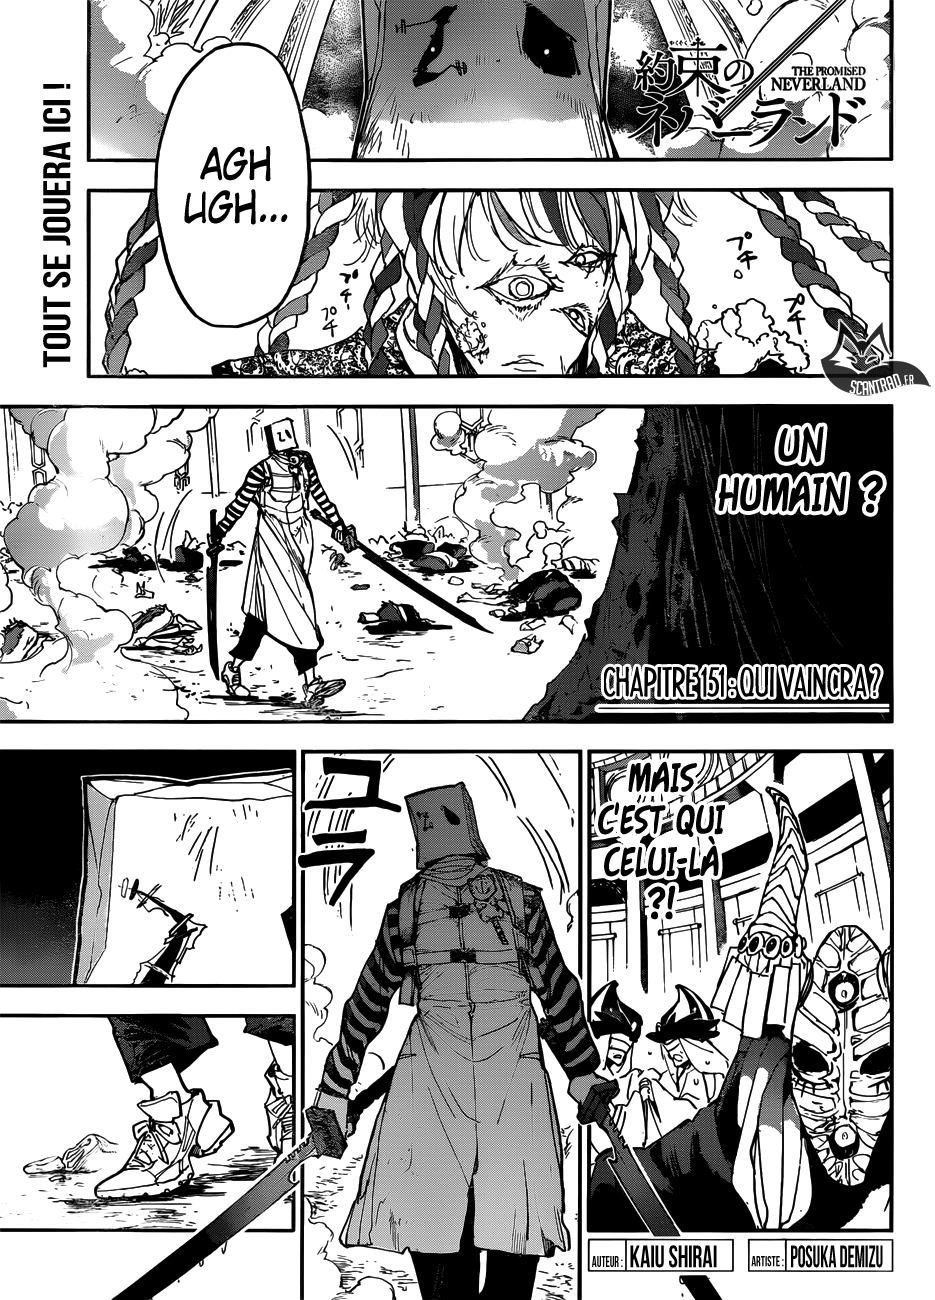 The Promised Neverland: Chapter chapitre-151 - Page 1